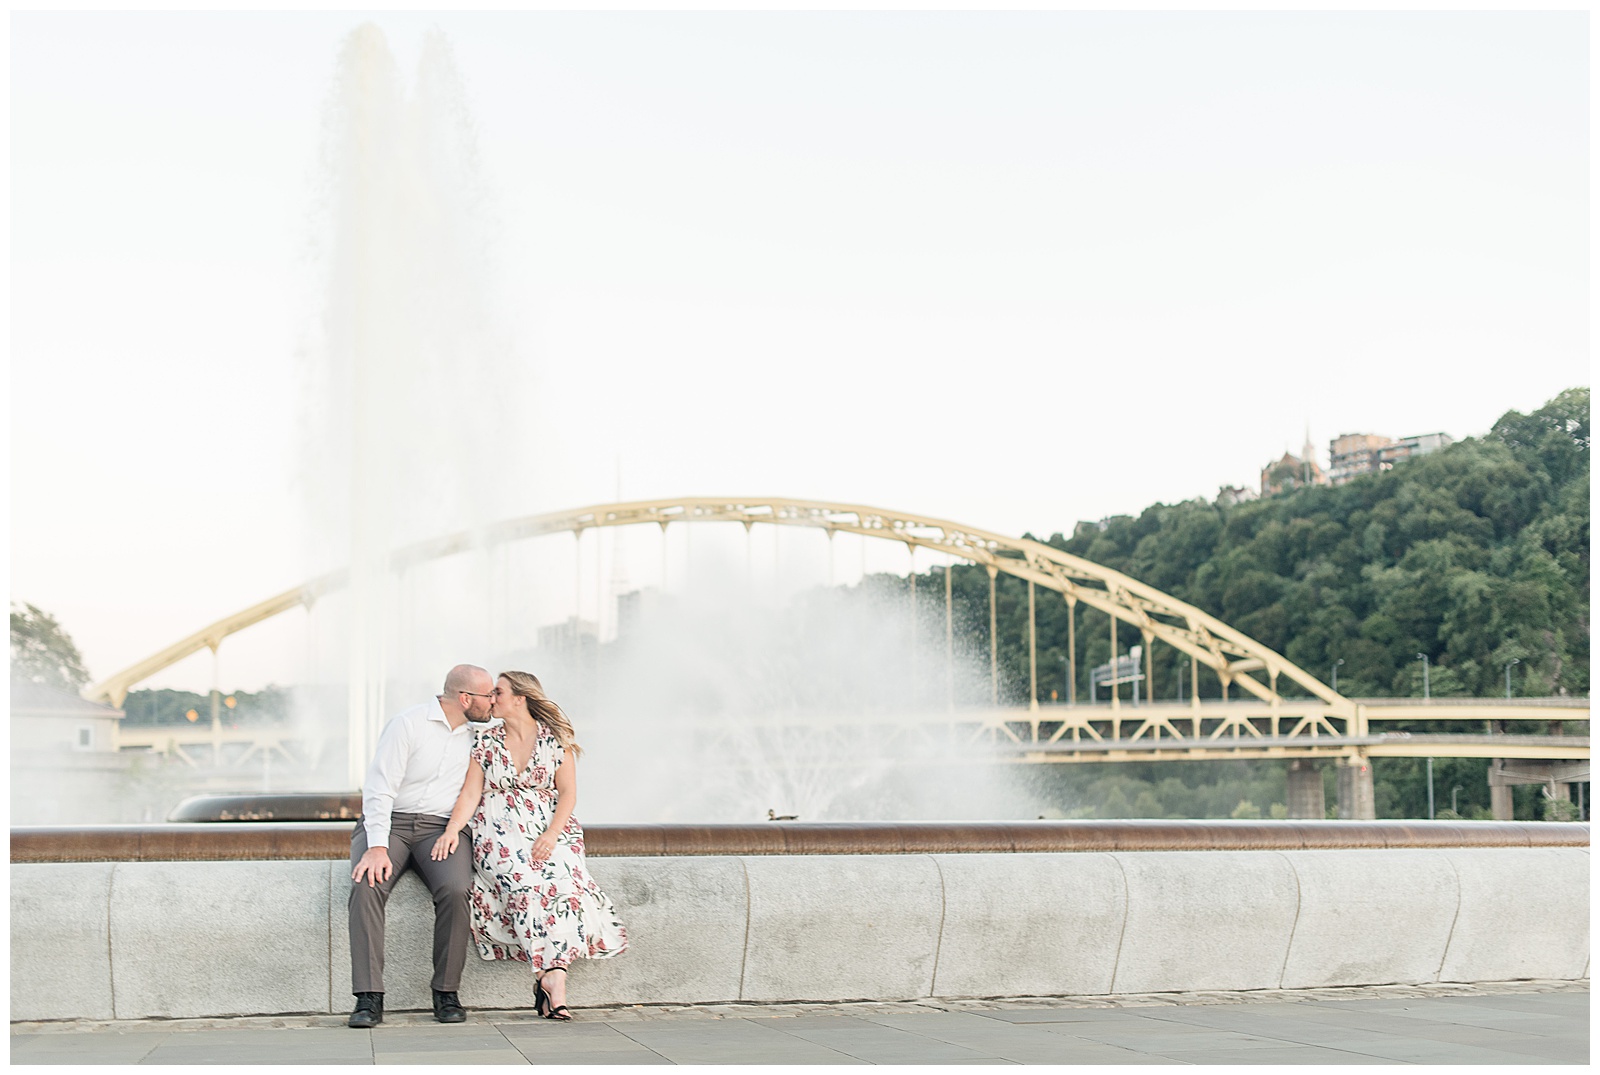 the couple is outdoors sitting along a concrete wall in front of a water fountain and white steel bridge with trees behind it and the guy is on the left and the girl is on the right and they are sitting close together and kissing as the girl rests her right hand on the guy's left knee at Point State Park in downtown Pittsburgh